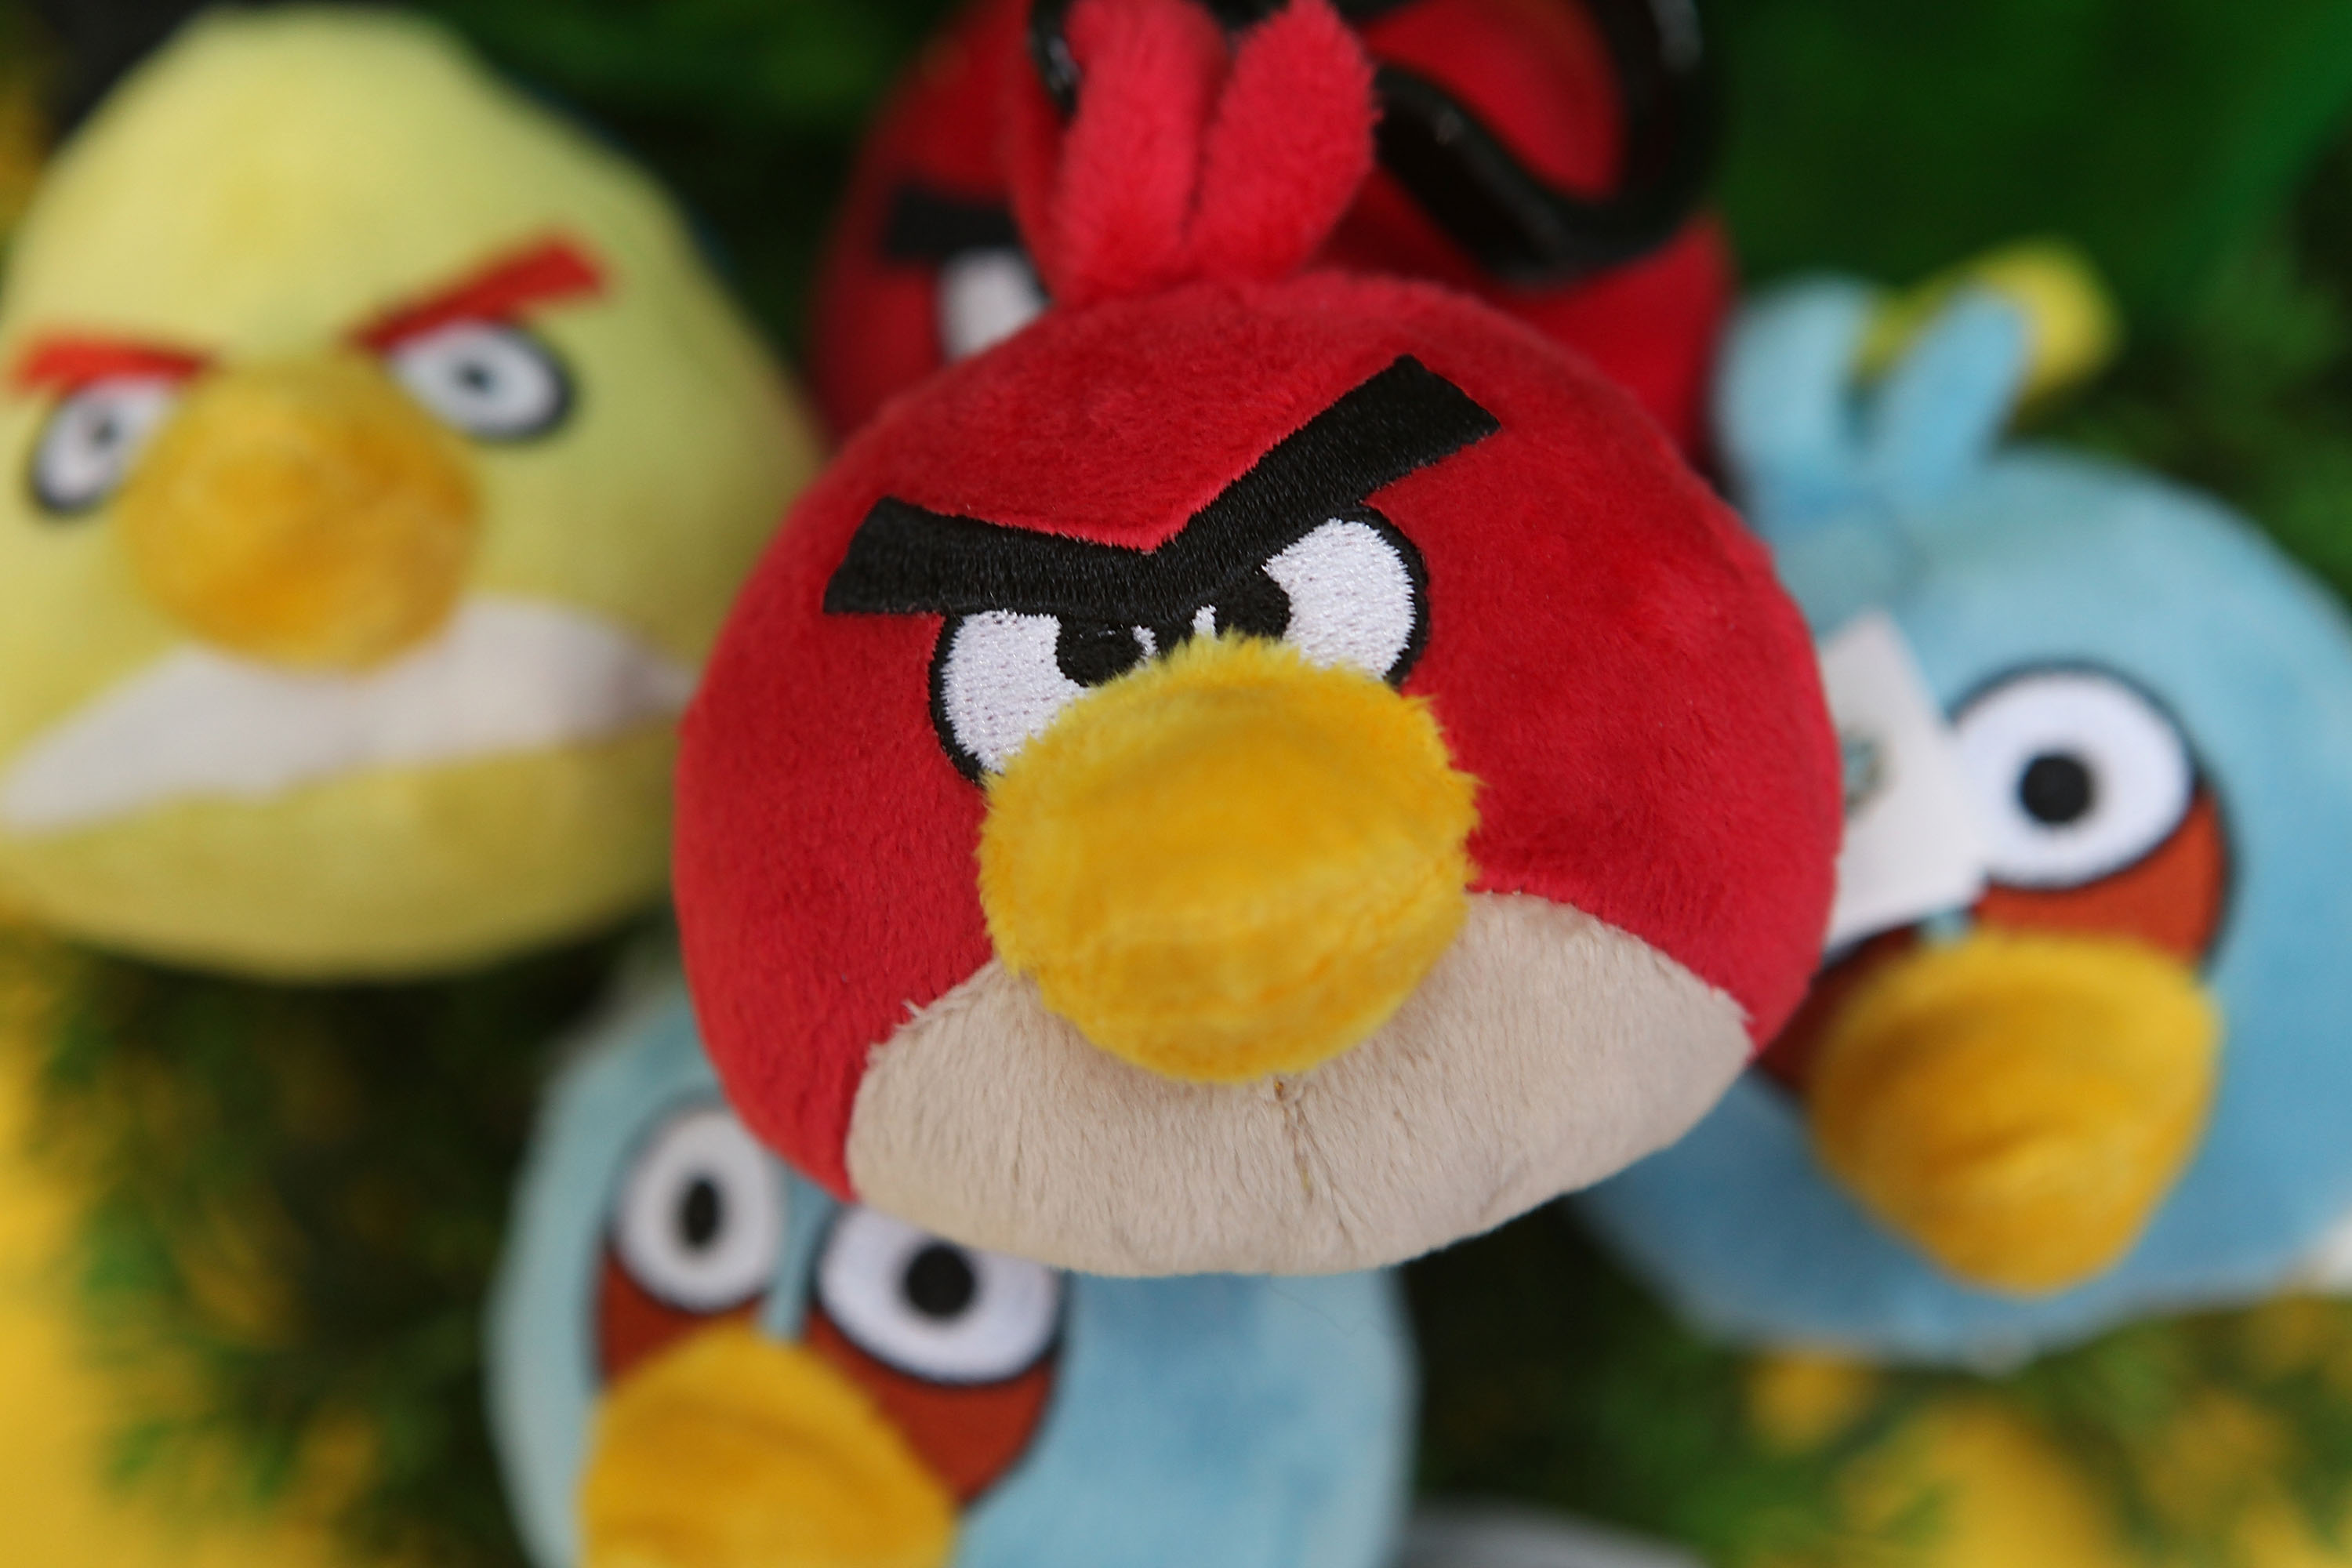 Angry Birds plush toys on display at the Toy Fair 2011 at Olympia Exhibition Centre on Jan. 25, 2011 in London, England. (Tim Whitby—Getty Images)